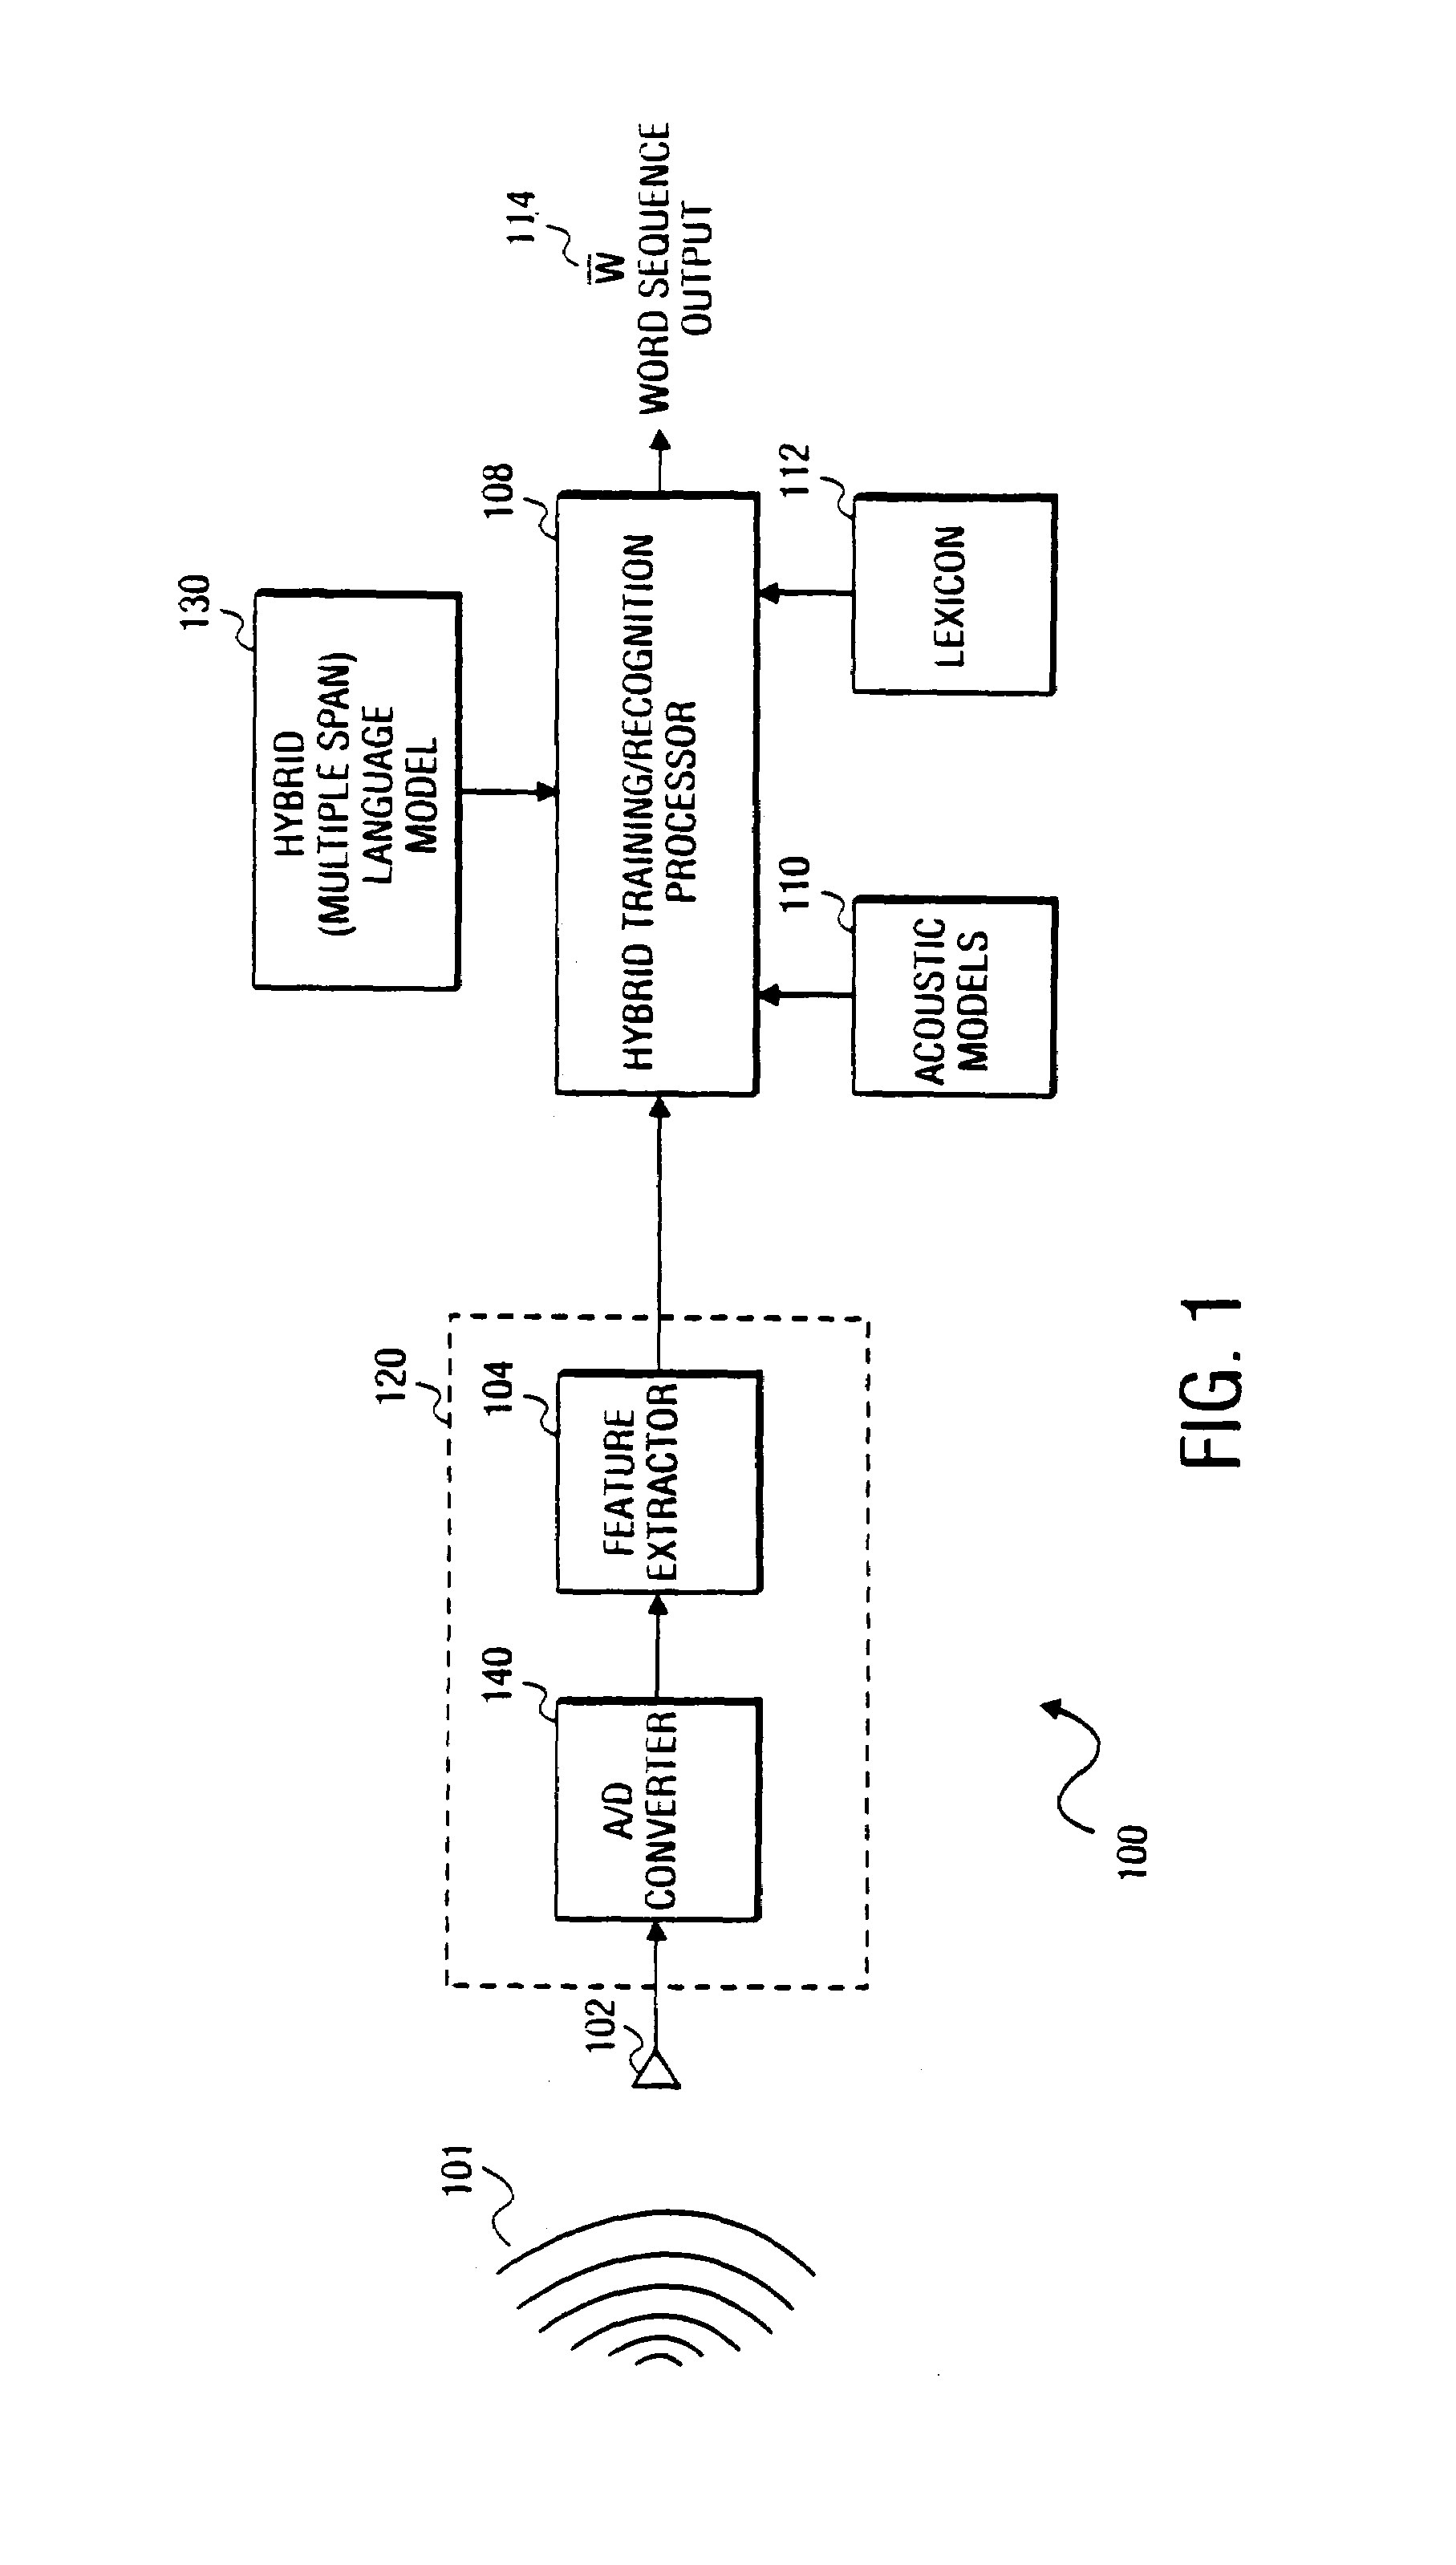 Method for dynamic context scope selection in hybrid N-gram+LSA language modeling